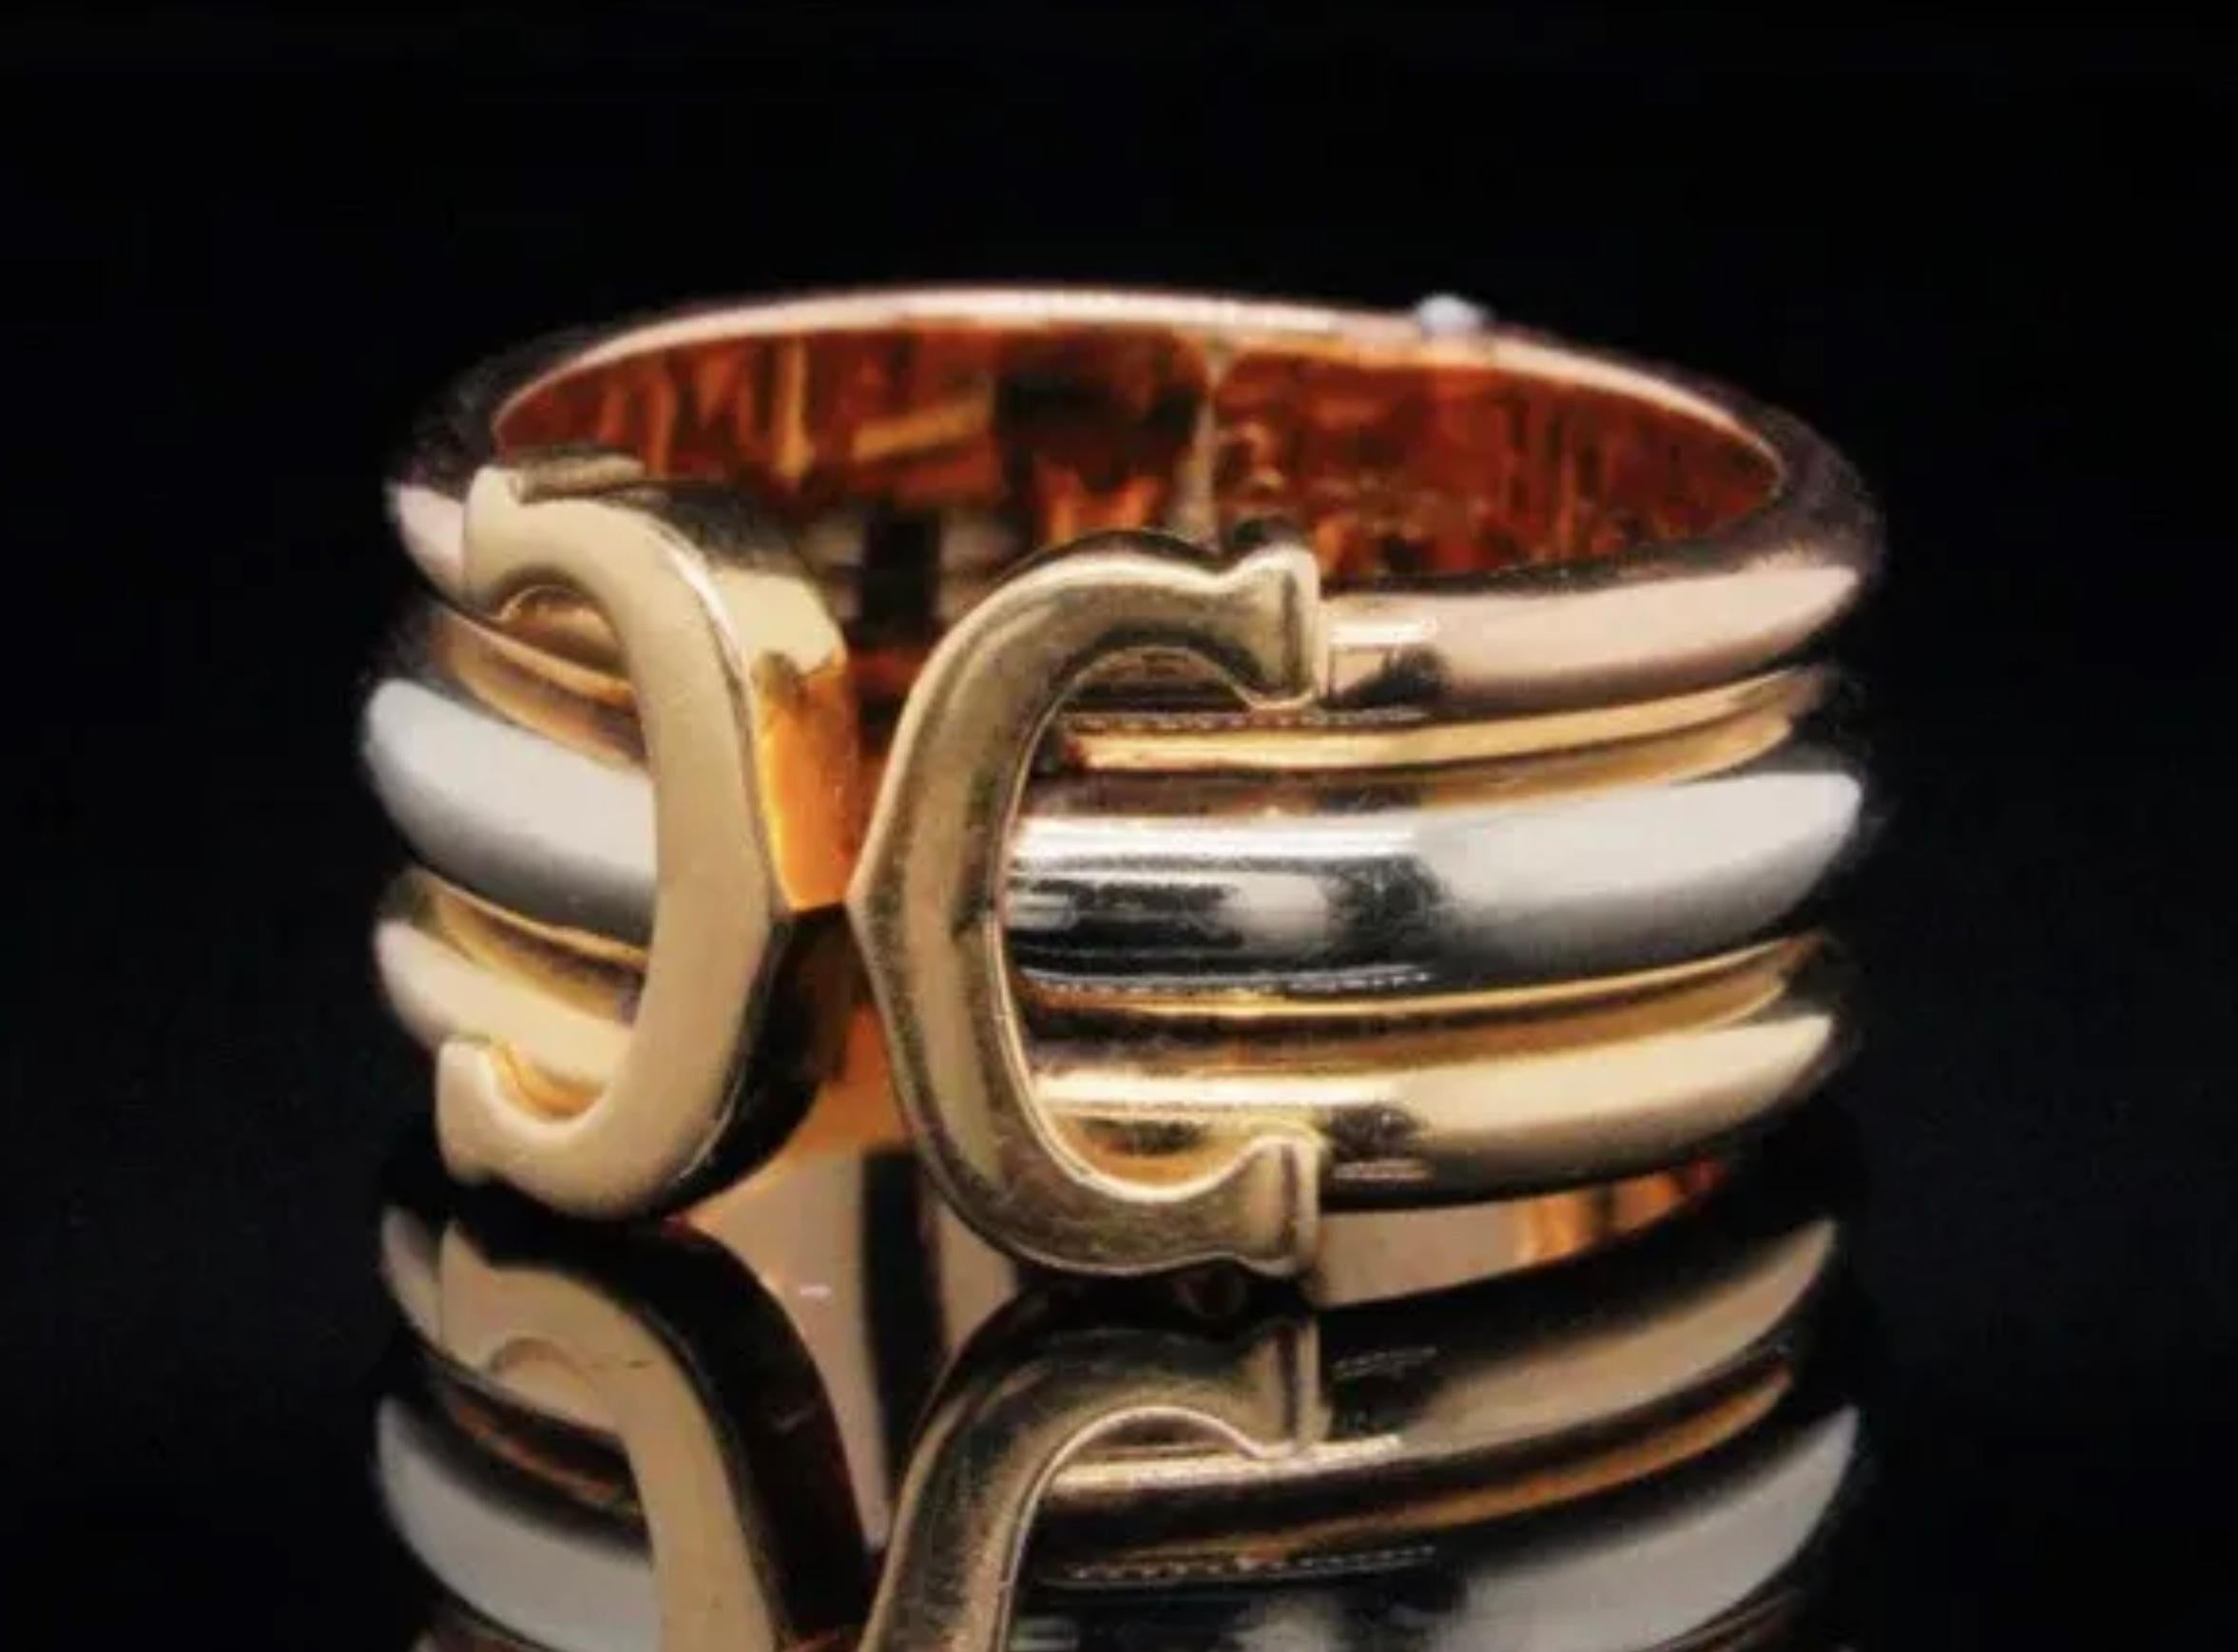 Cartier 18k Tri-Color Gold Double C Ring.



Cartier 18k tri-color gold double C decor ring. Features 18k yellow, white and rose gold bands finished at the top with a double C Cartier motif.

The ring measures 10mm wide and is signed “CARTIER” along